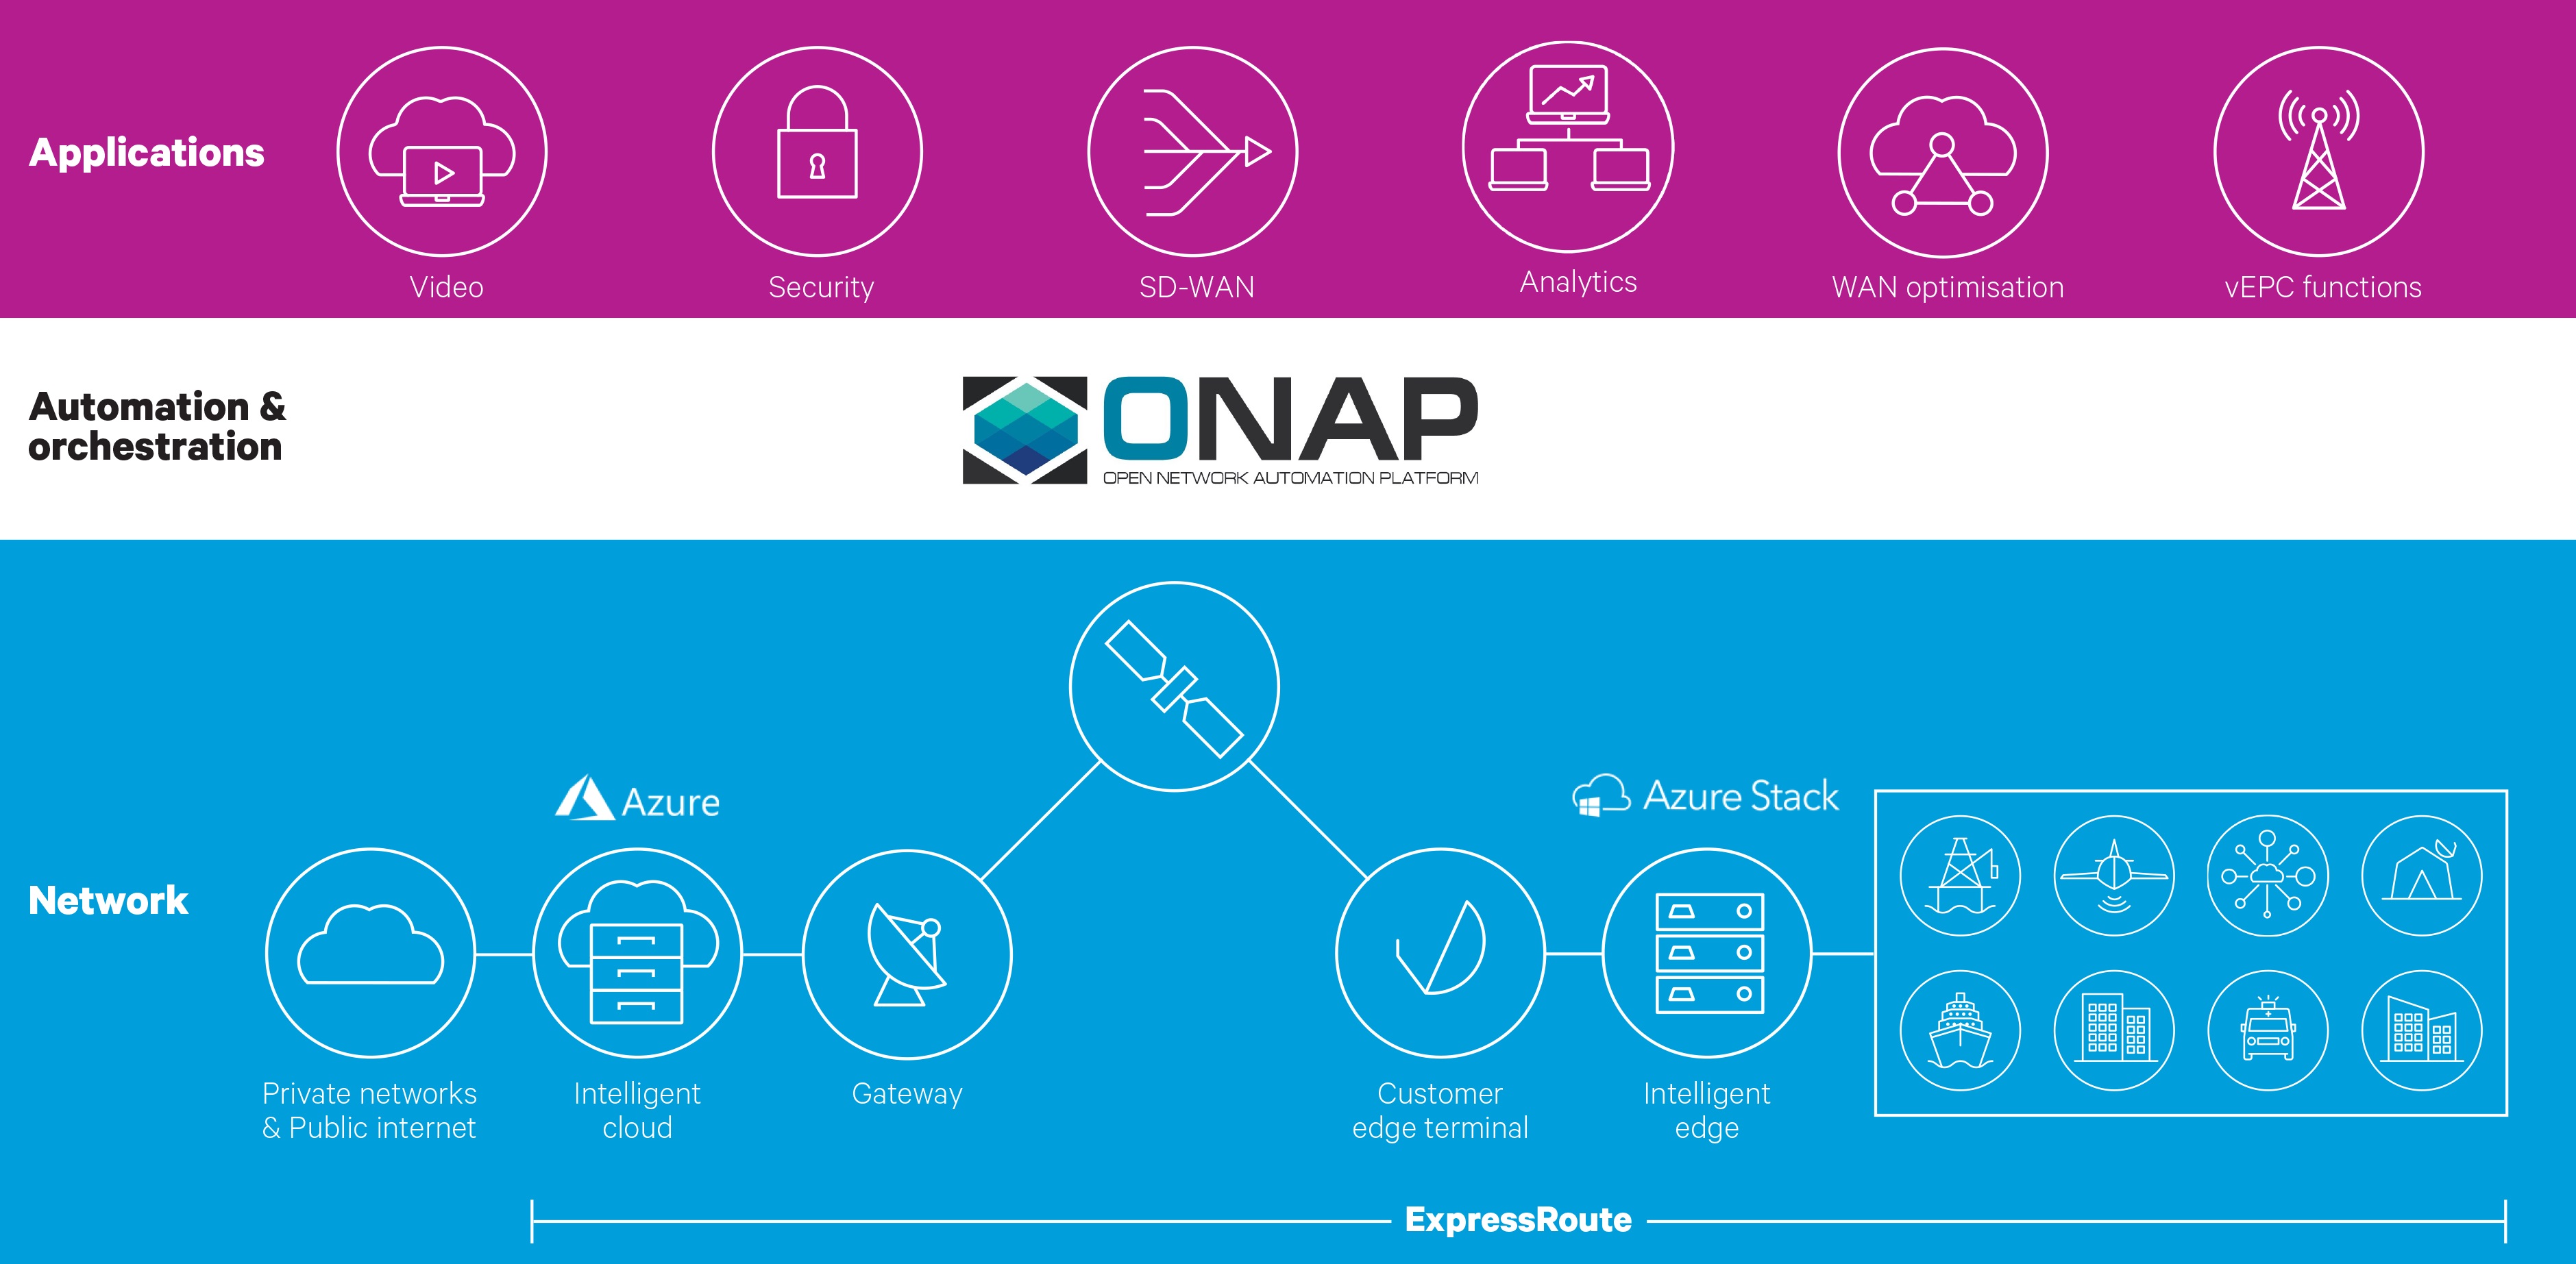 ExpressRoute with ONAP service orchestration